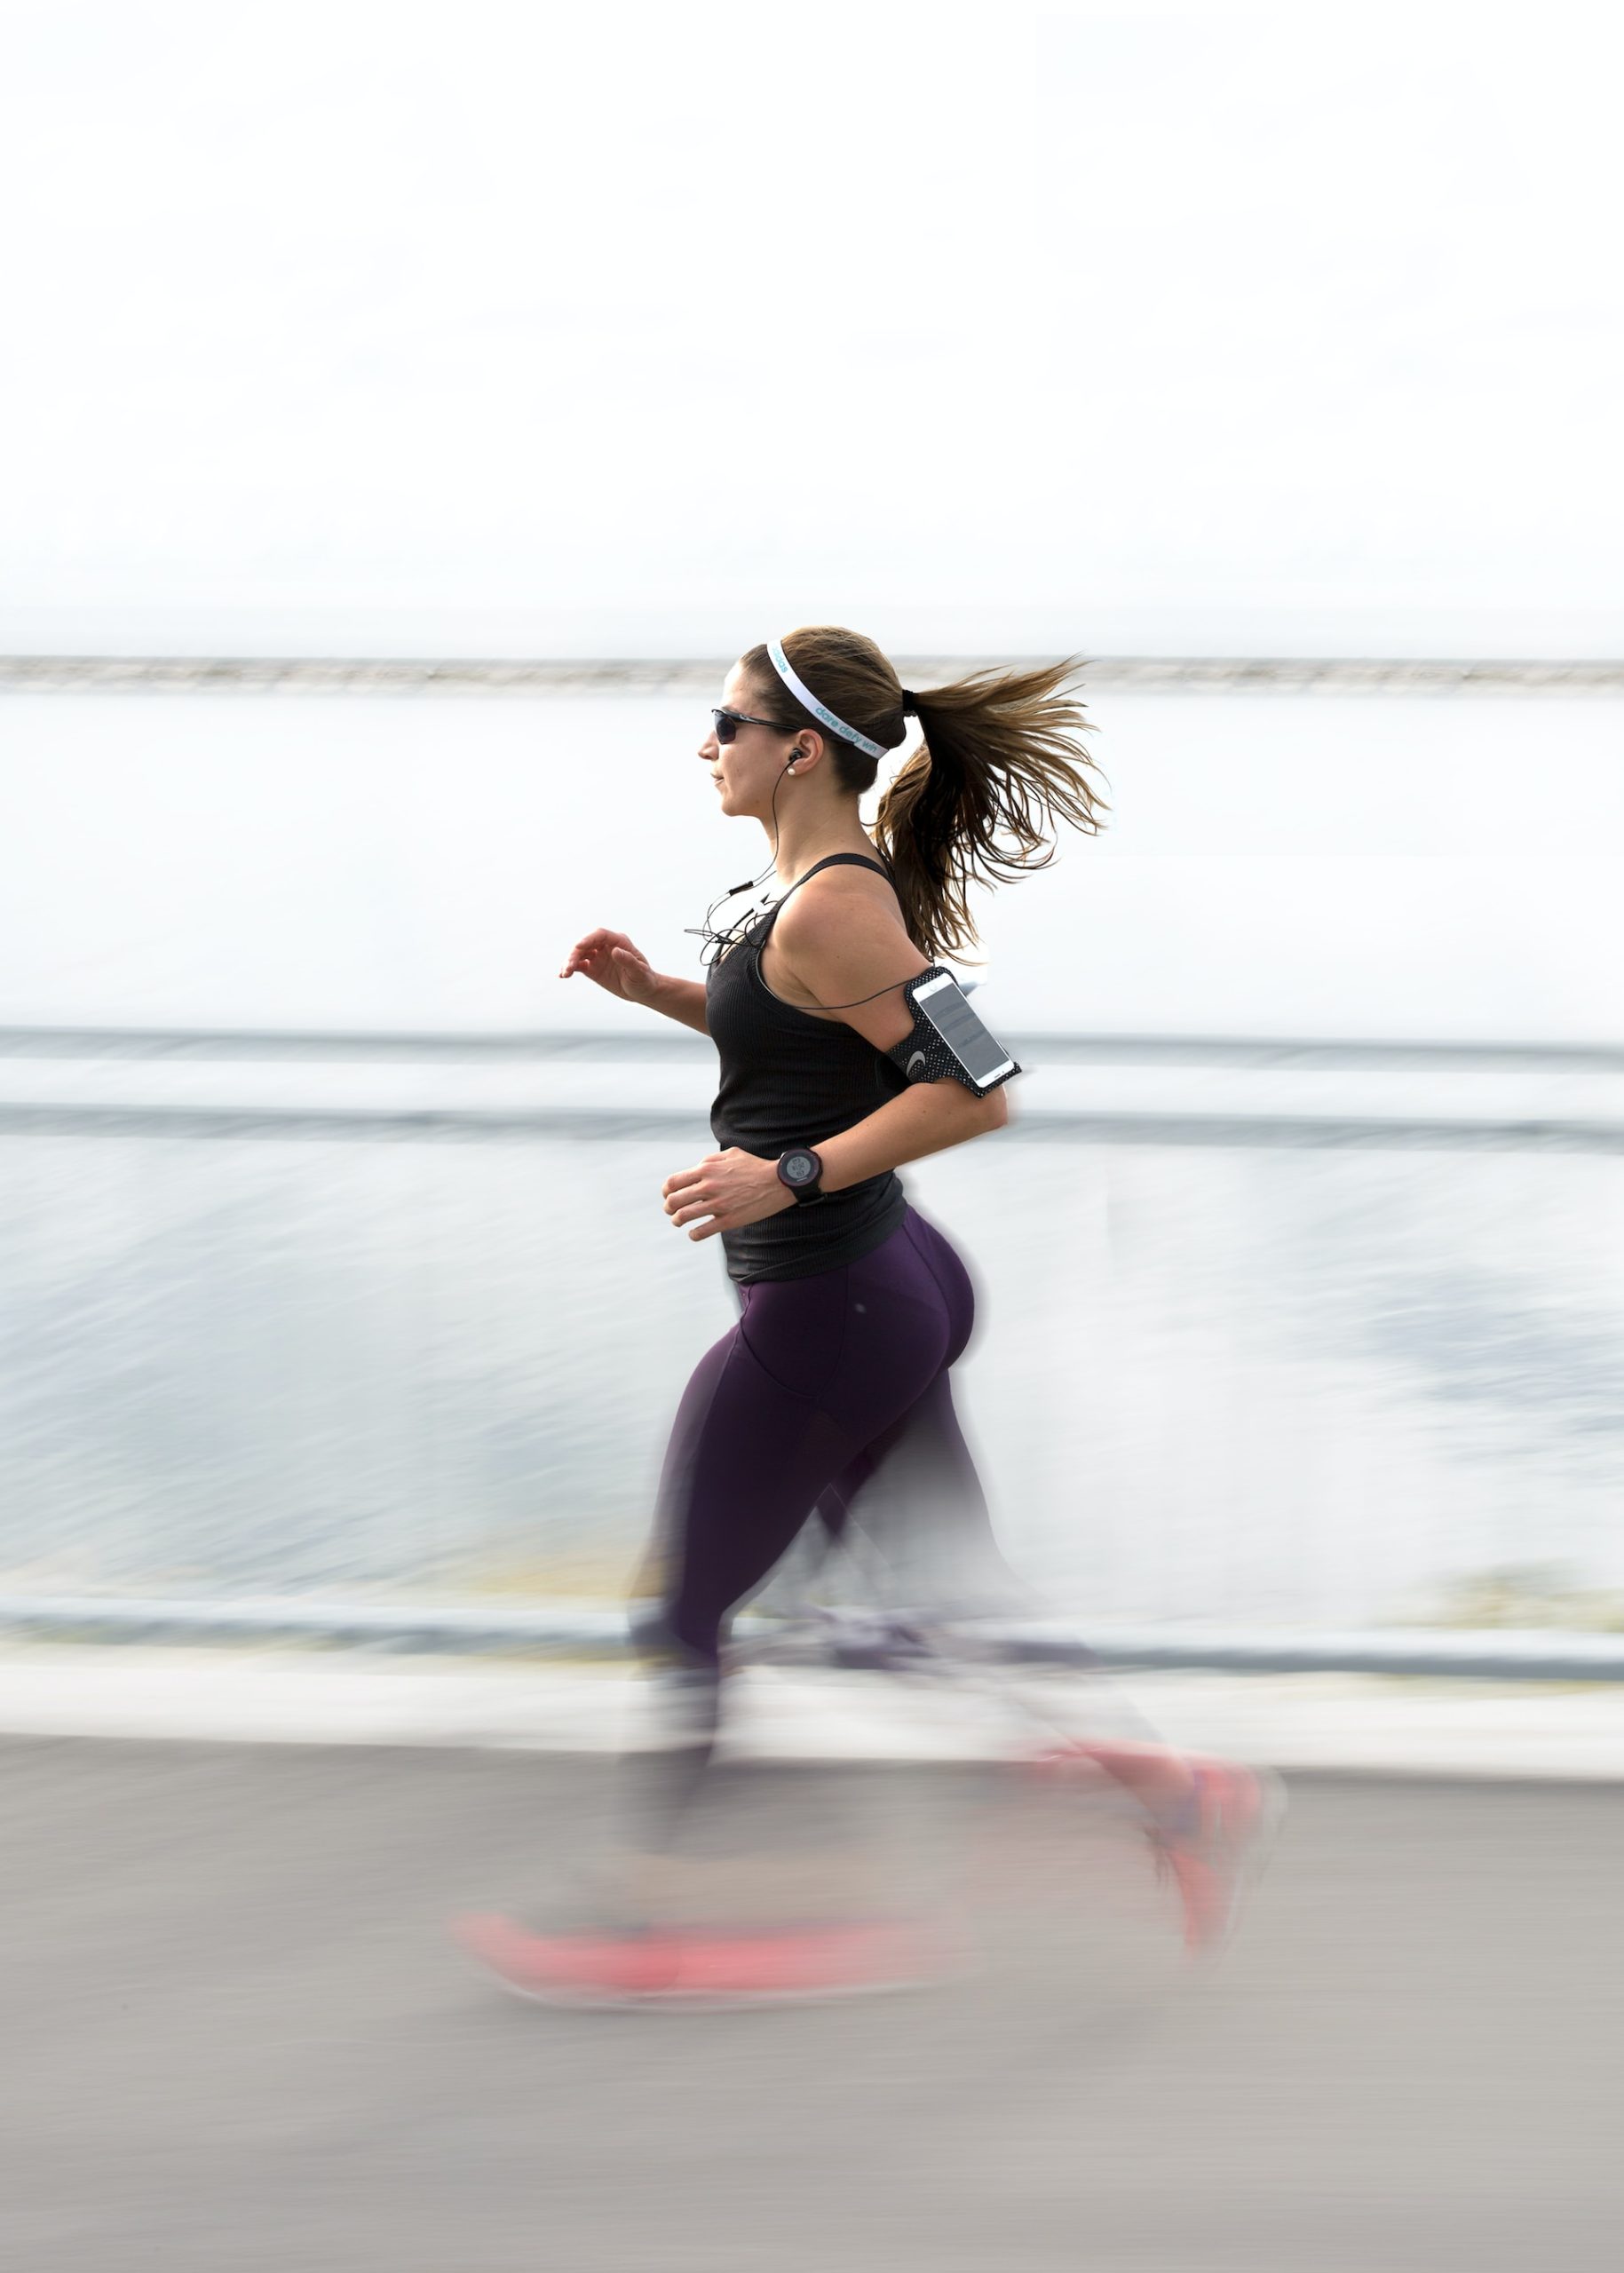 the image shows a running female athlete